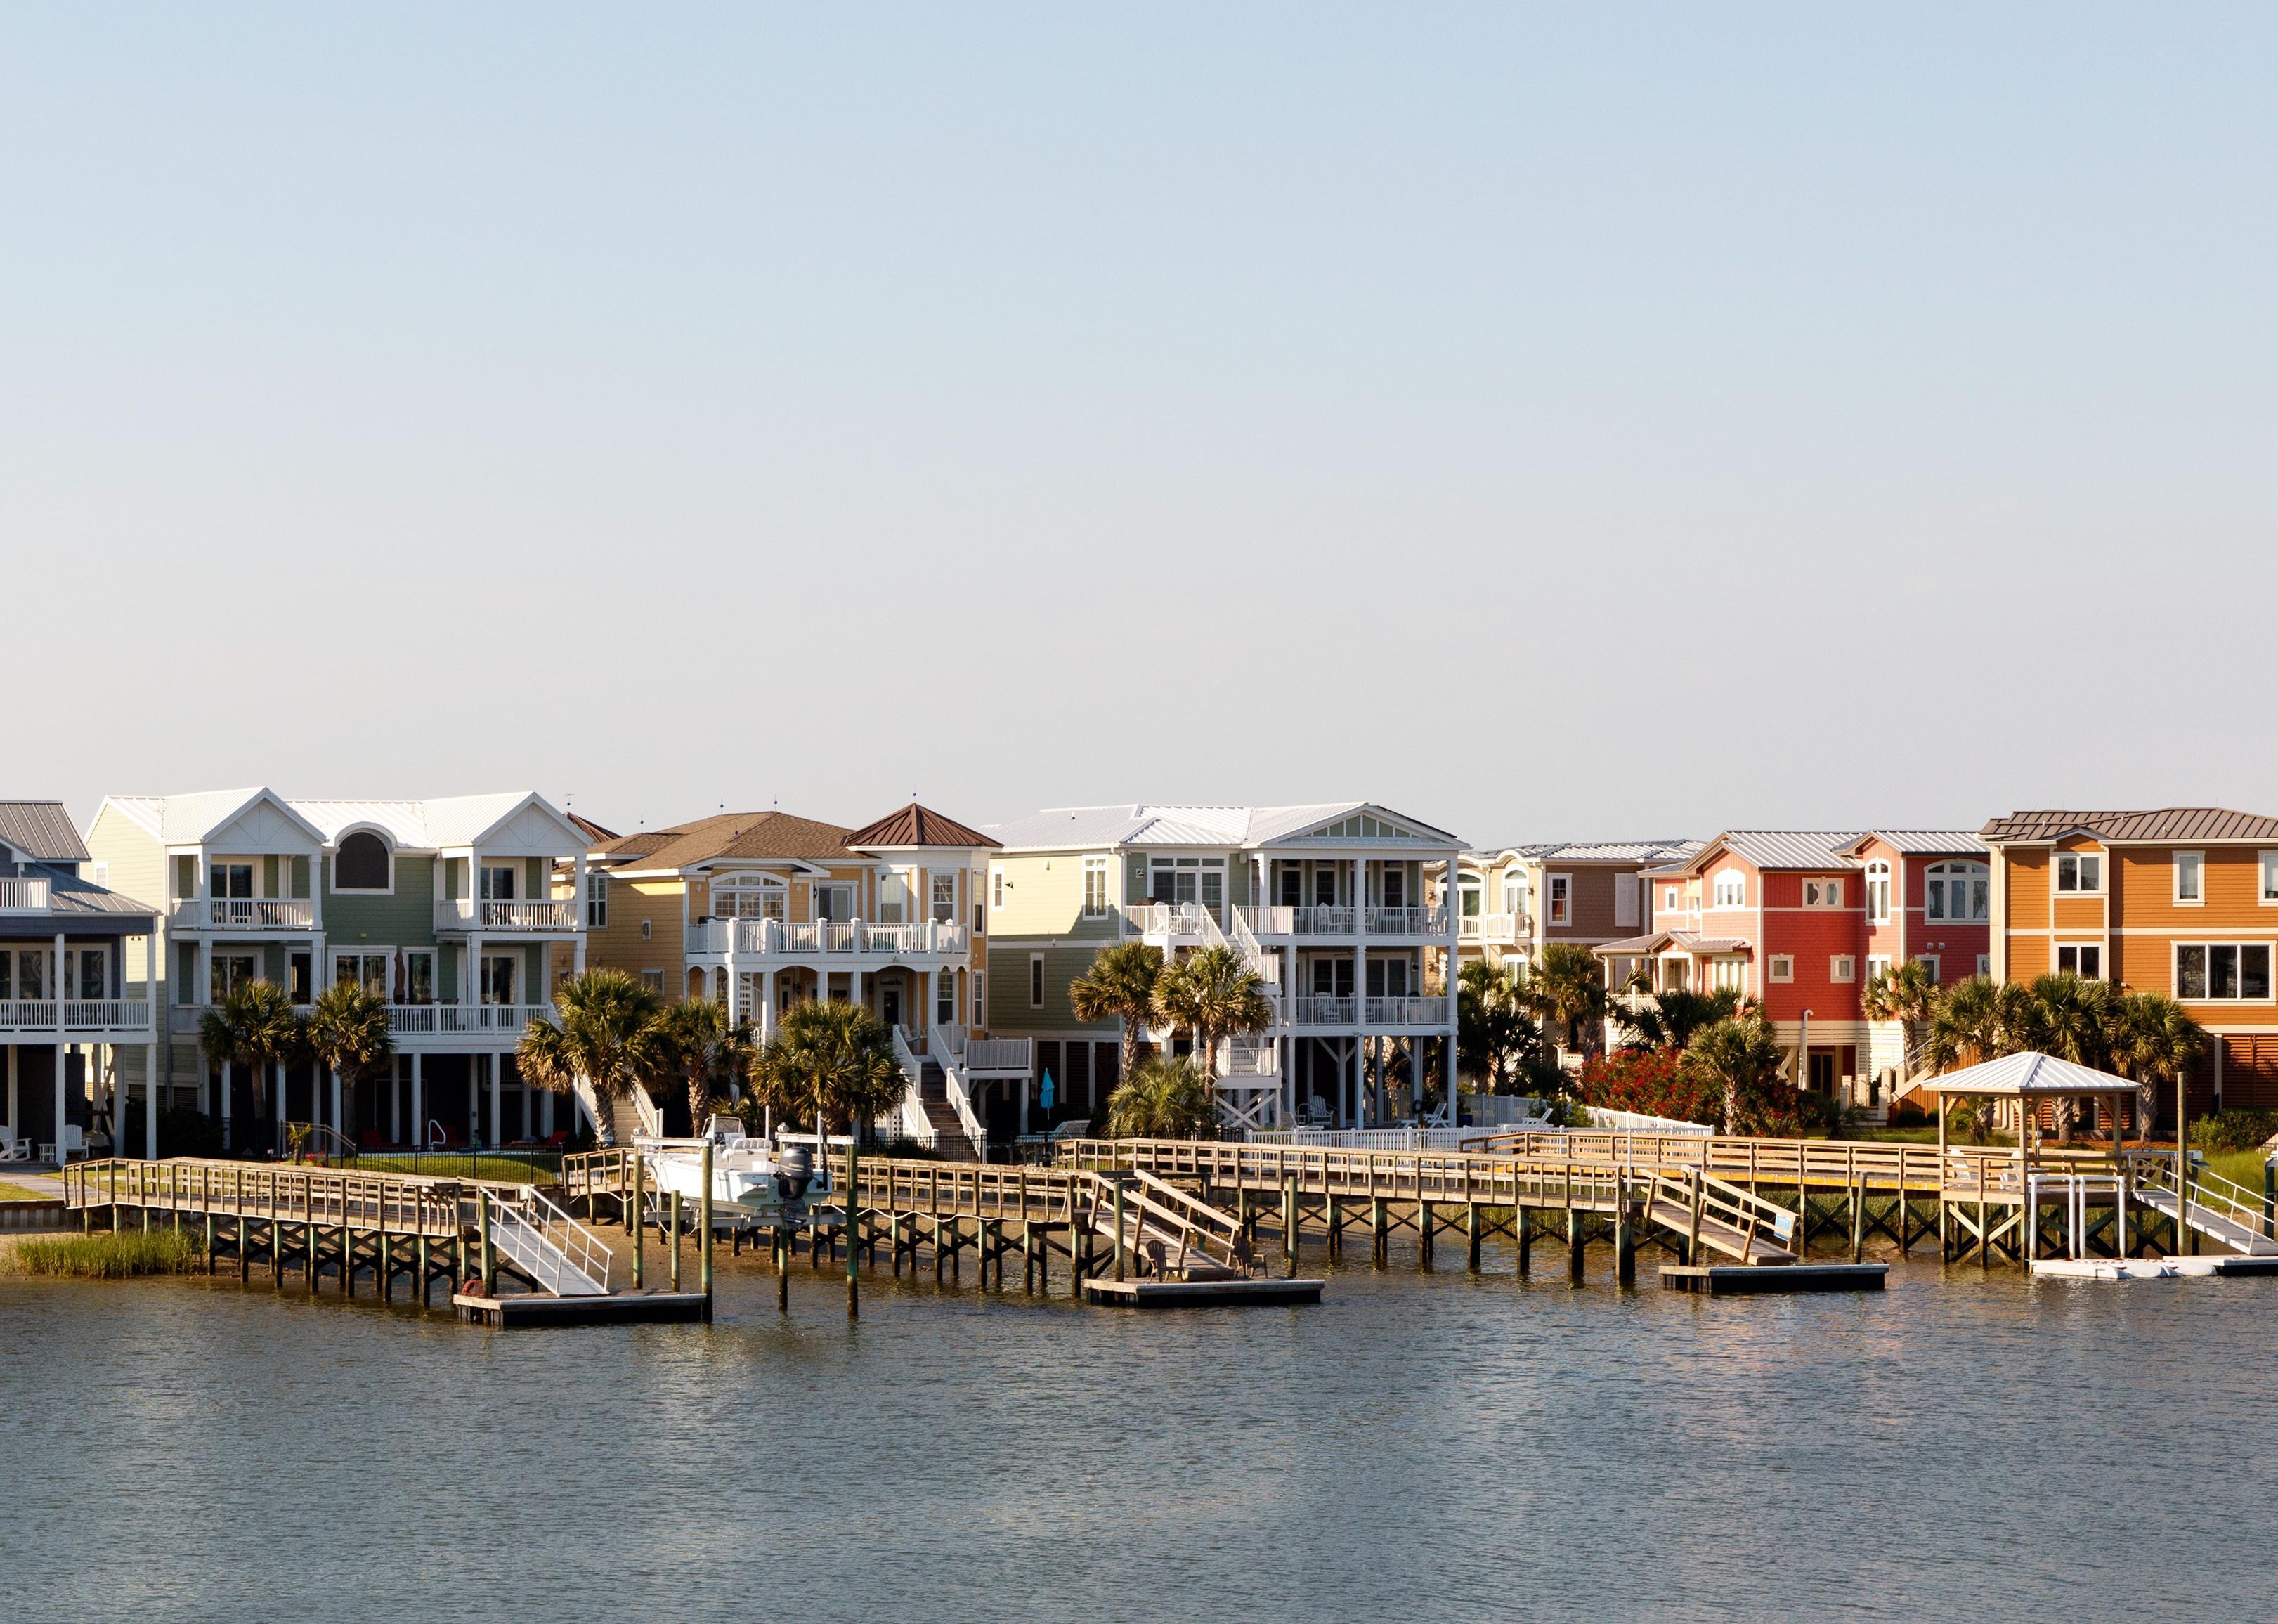 Waterfront condos with boat docks.